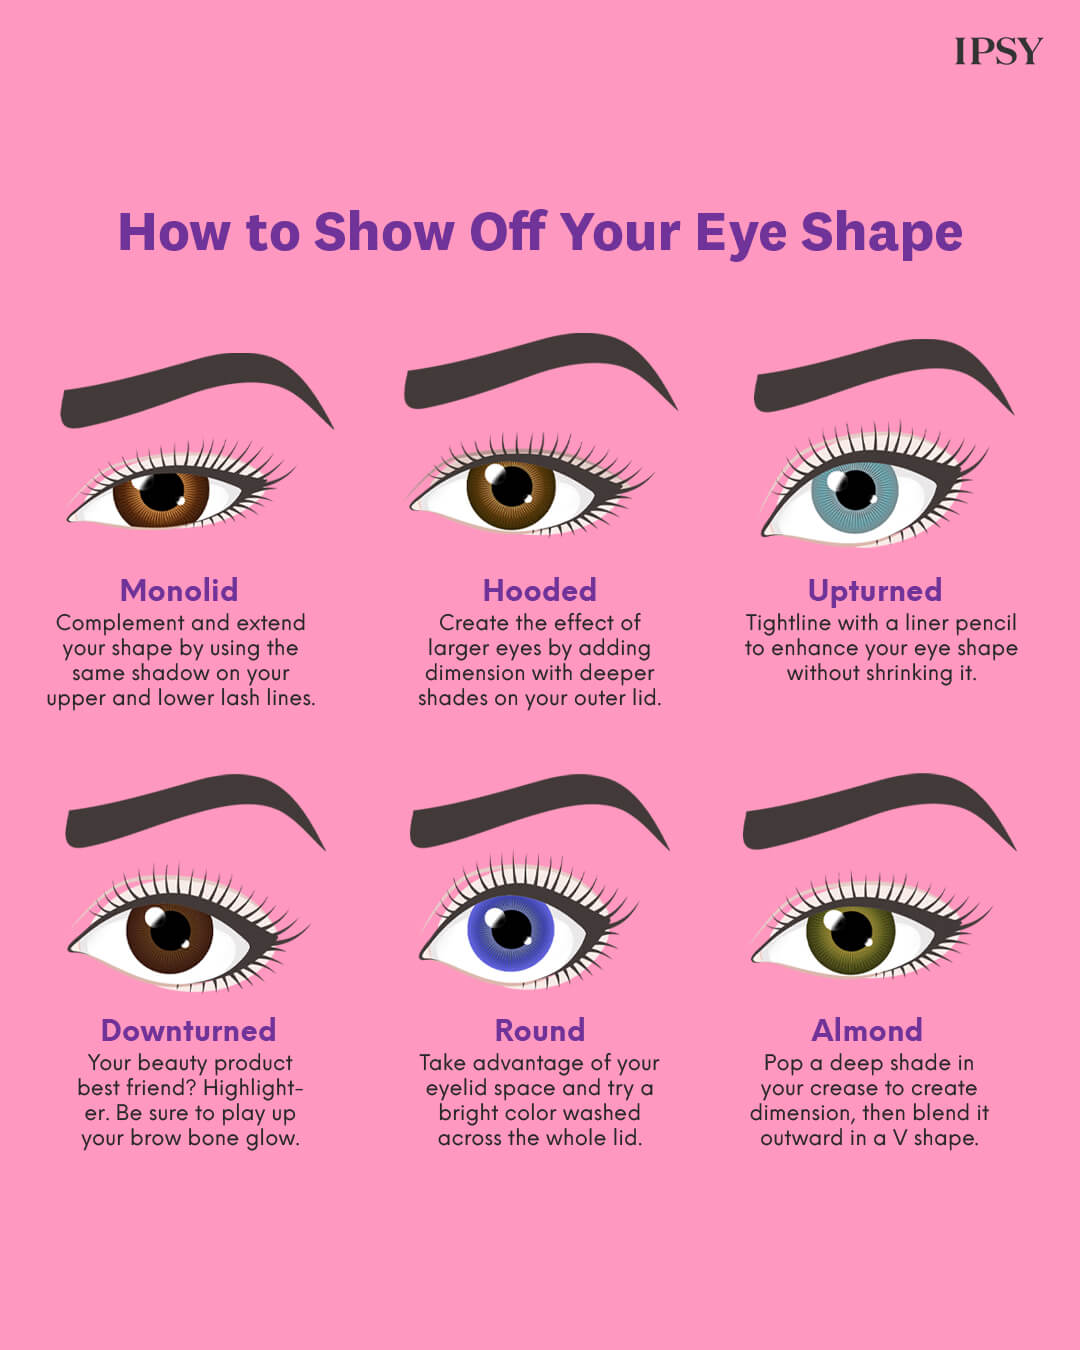 Guide To Finding Your Eye Shape + Makeup Tips For Each Shape | Ipsy